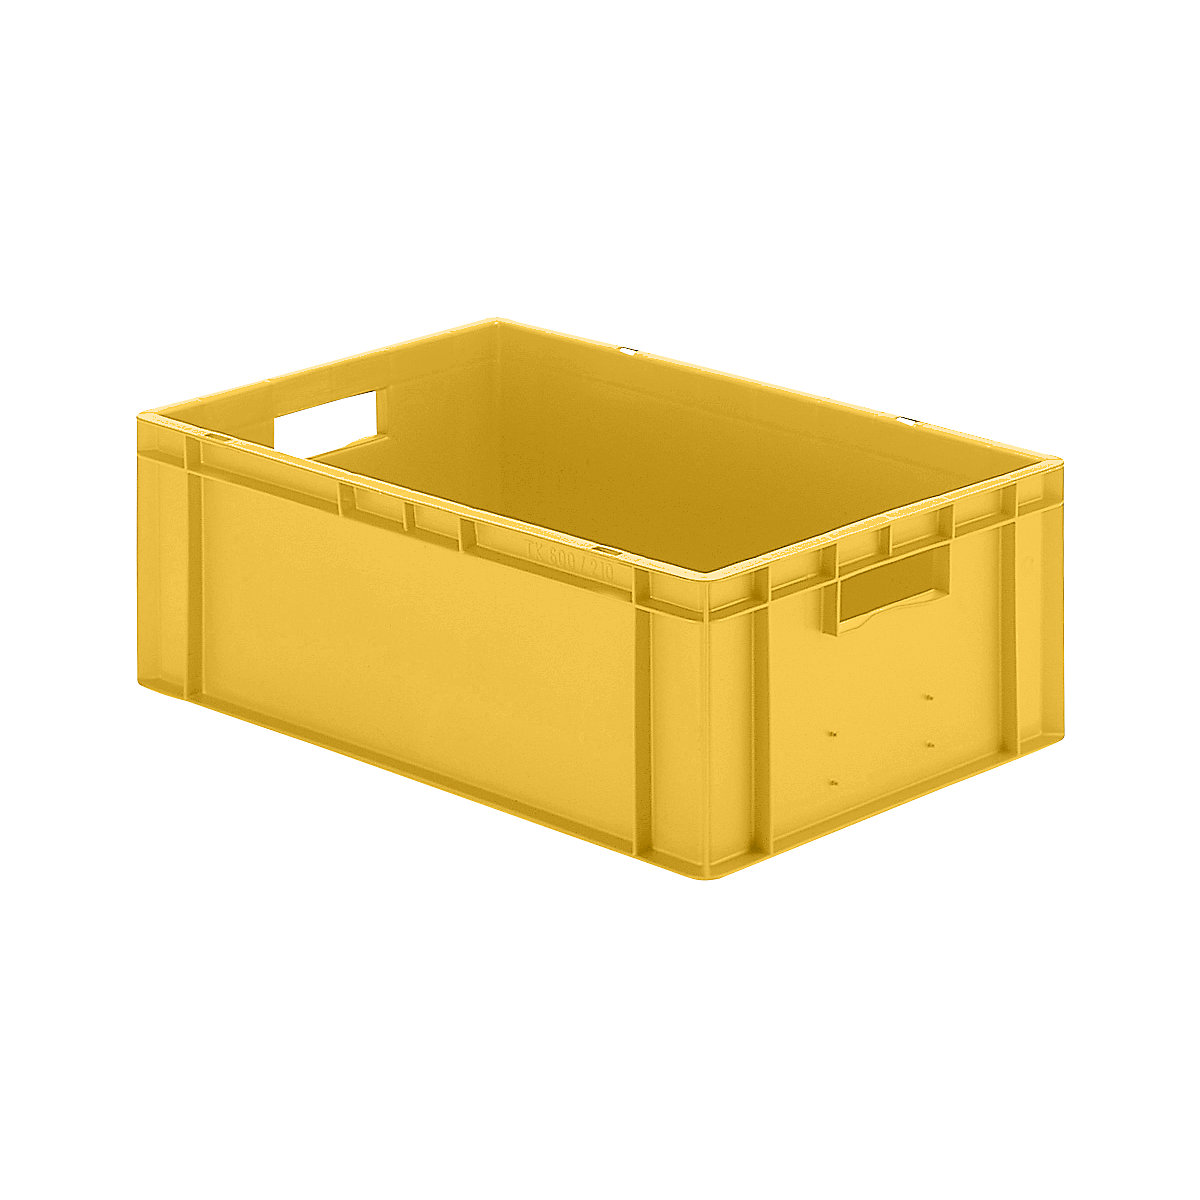 Euro stacking container, closed walls and base, LxWxH 600 x 400 x 210 mm, yellow, pack of 5